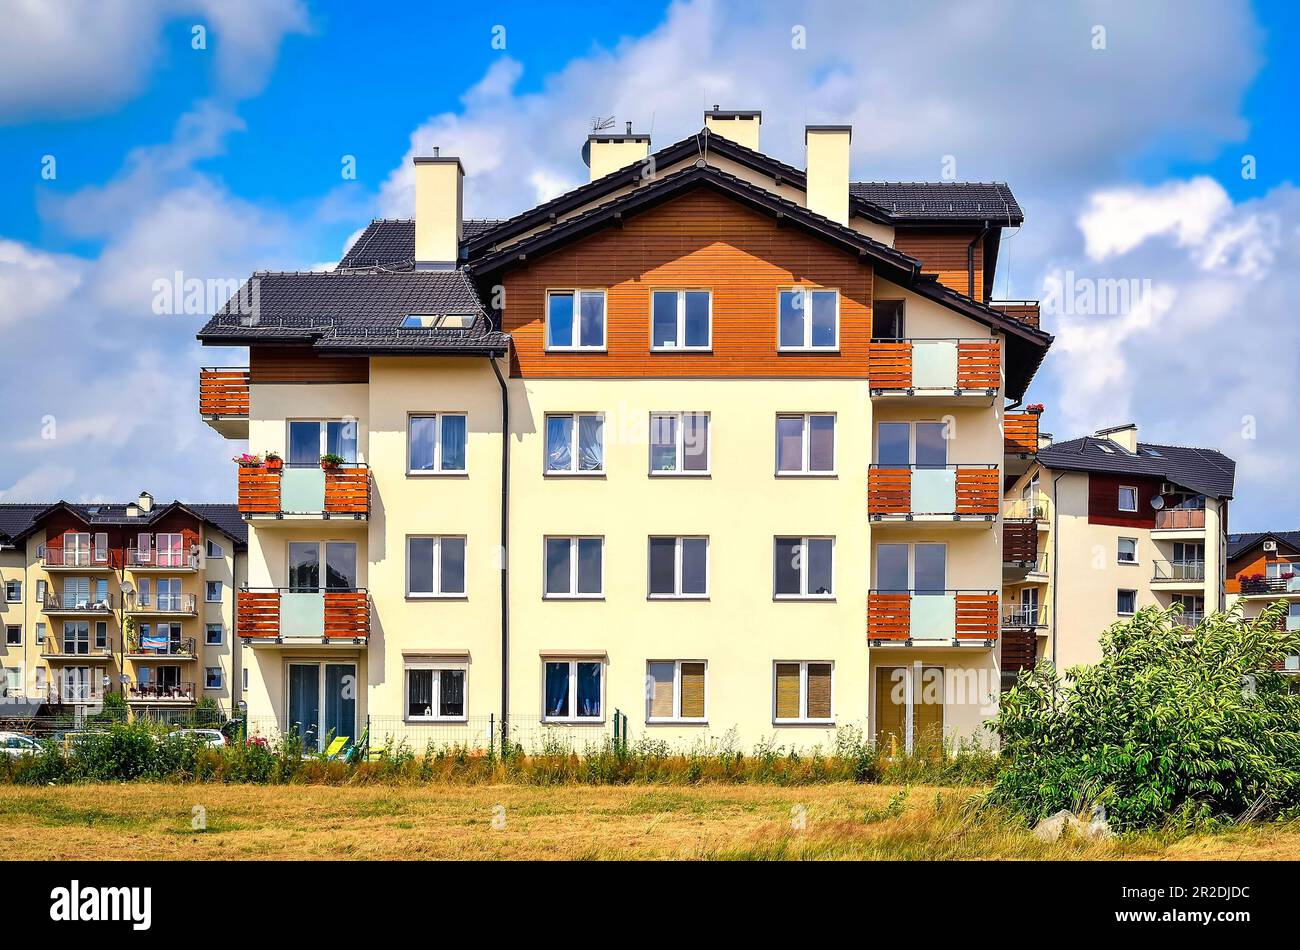 Tychy, Poland - July 14, 2015: New housing estates in Tychy City, Poland. Public view of newly built block of flats in the green area. Stock Photo